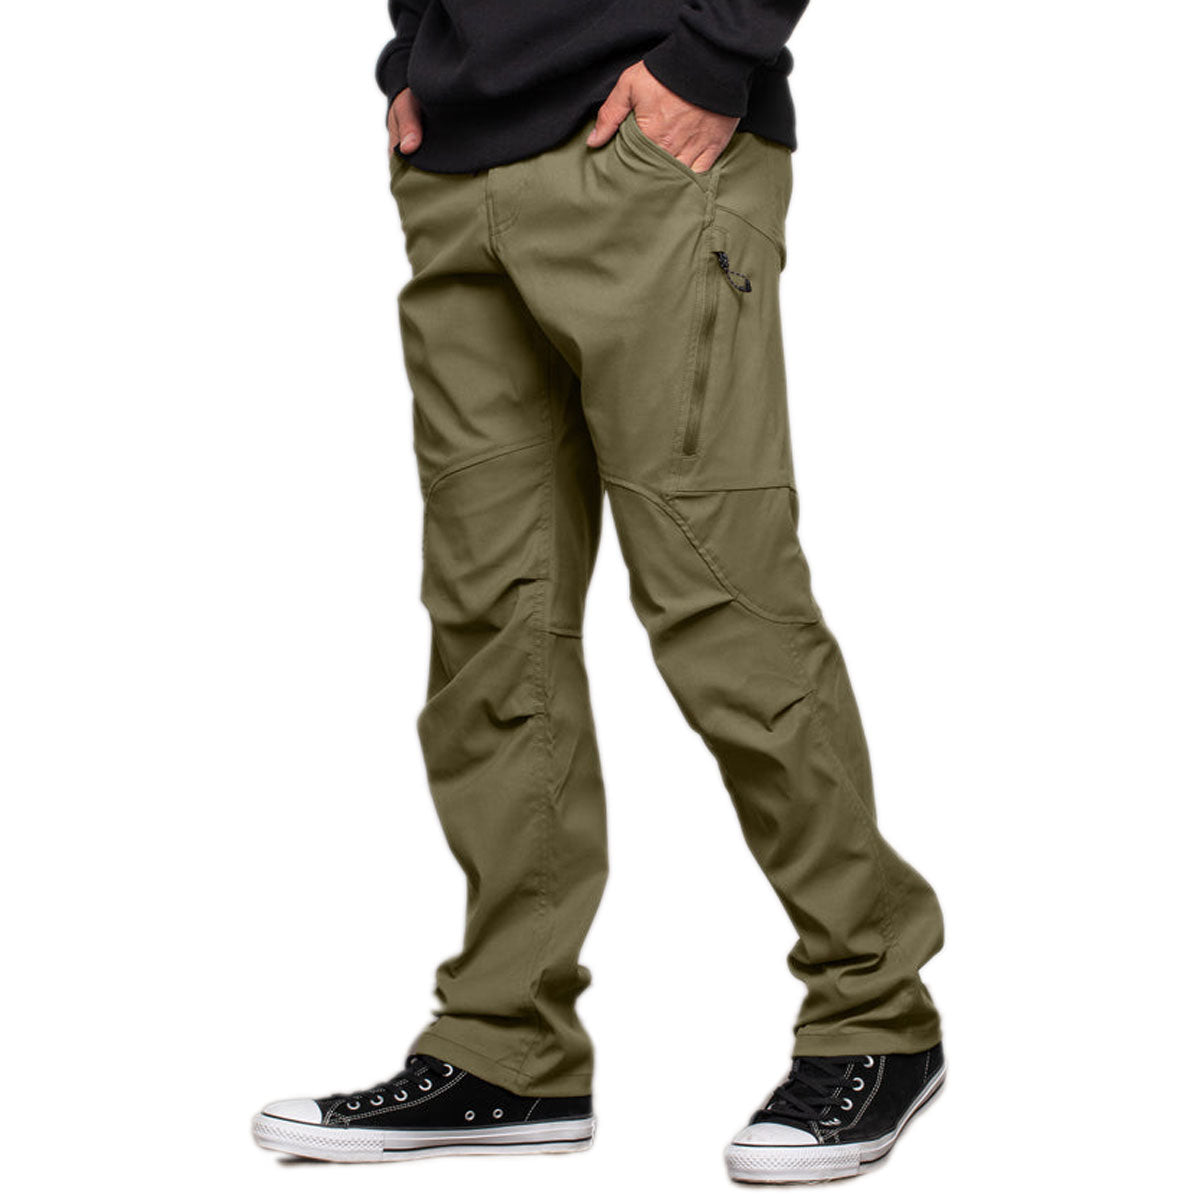 686 Anything Cargo Relaxed Pants - Dusty Fatigue image 1